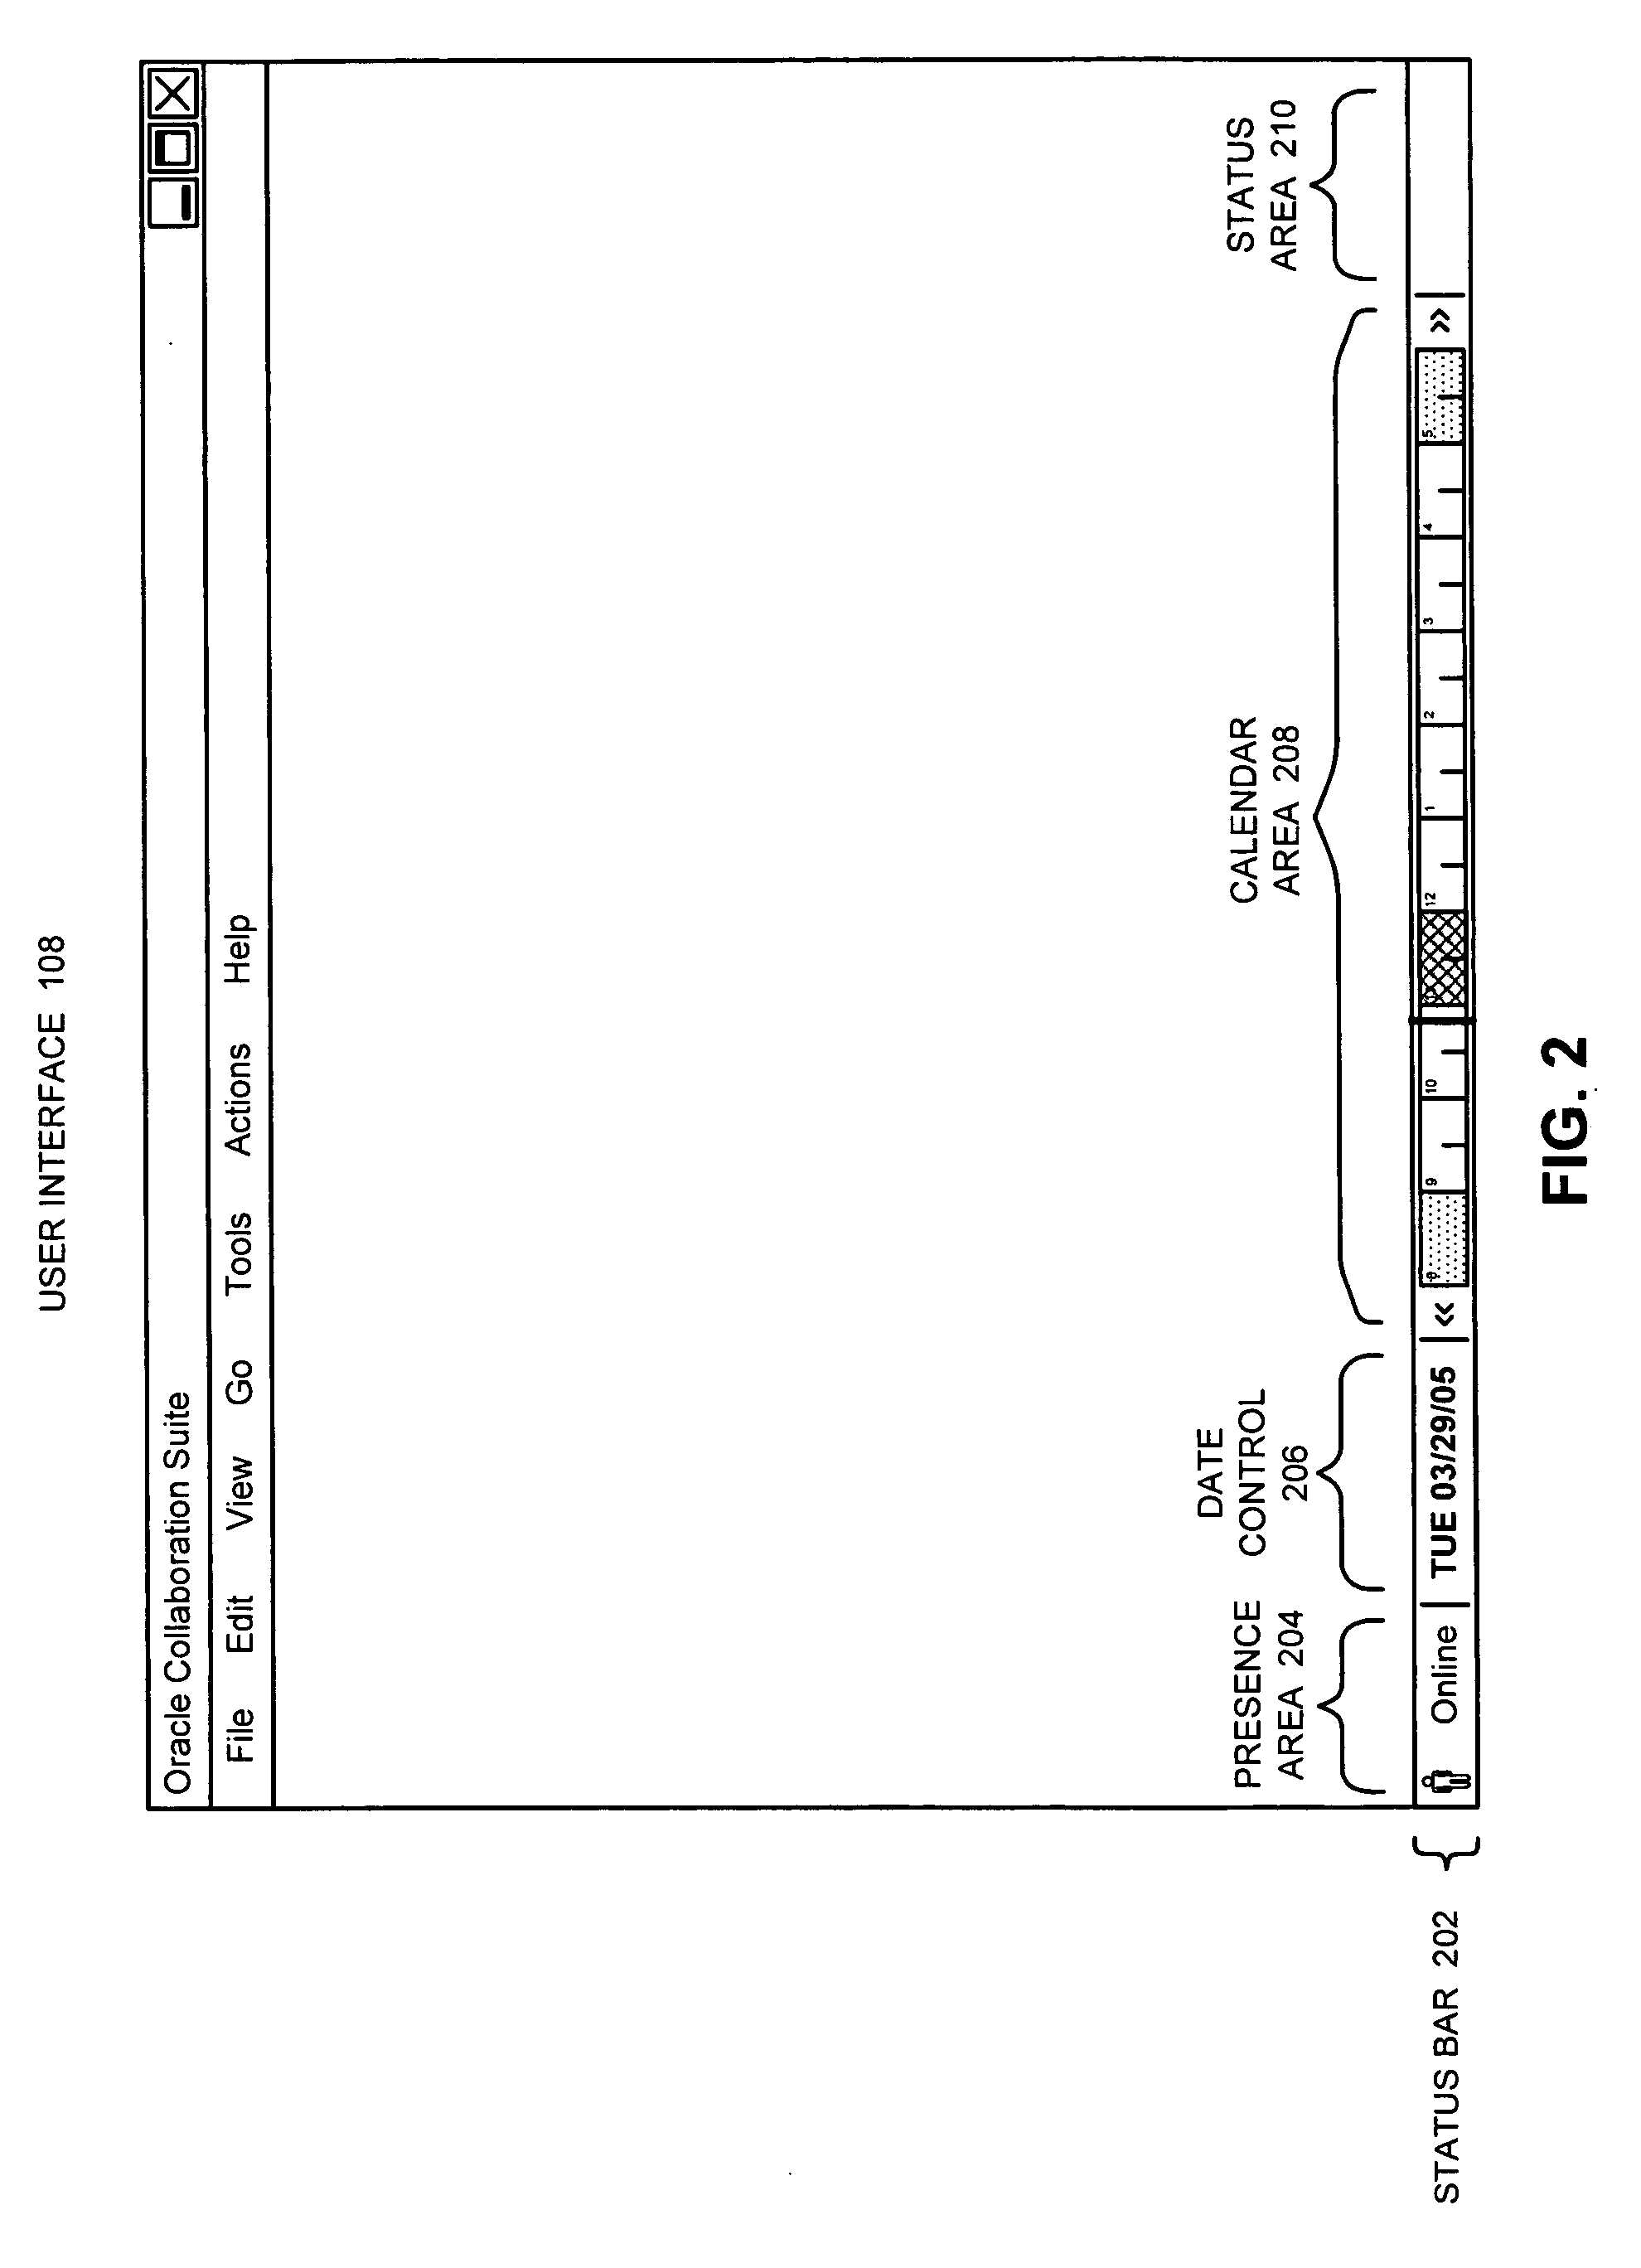 Method and an apparatus for displaying calendar information to a user